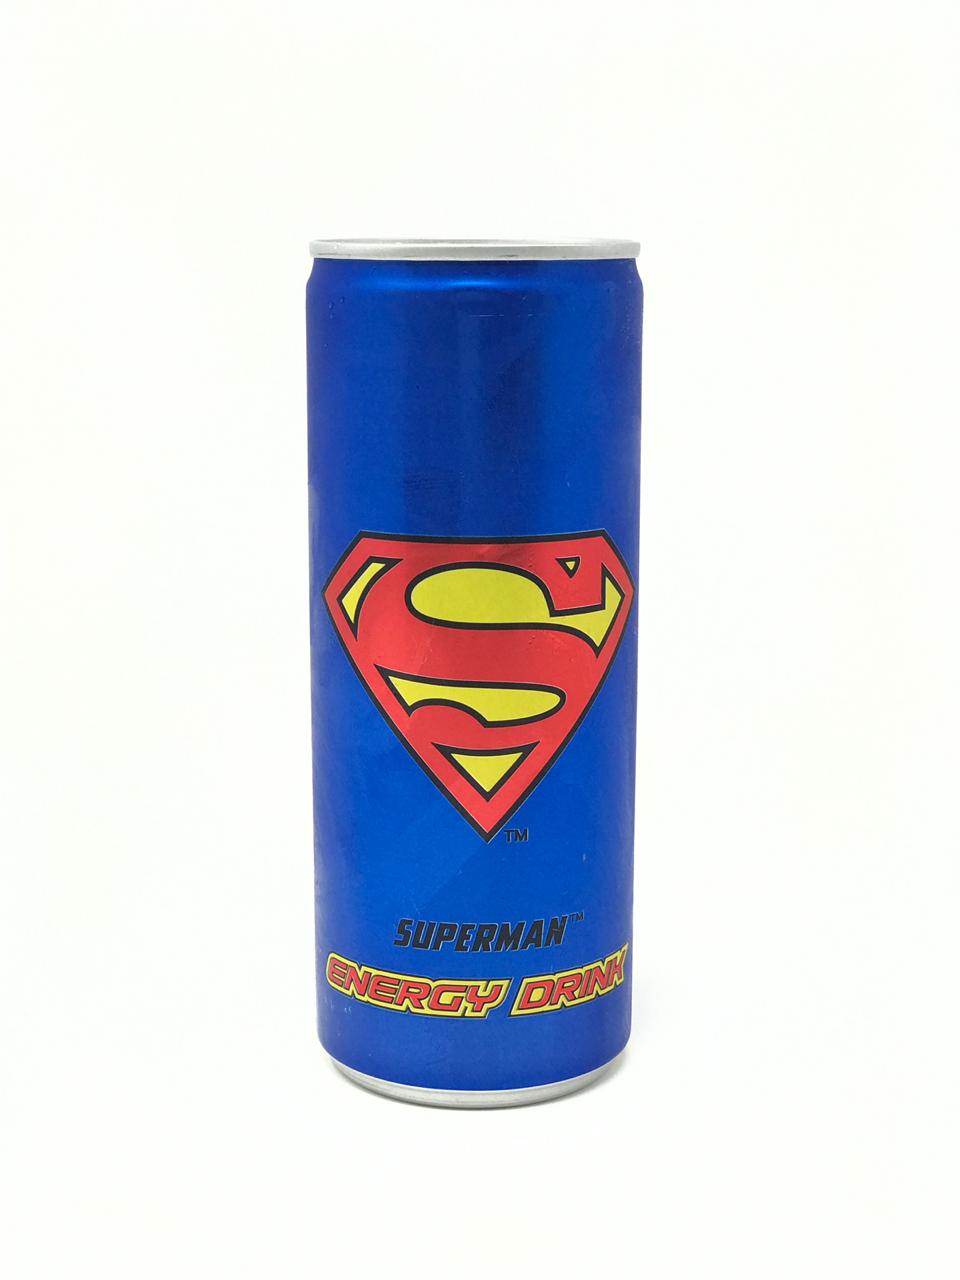 first impression of superman energy drink